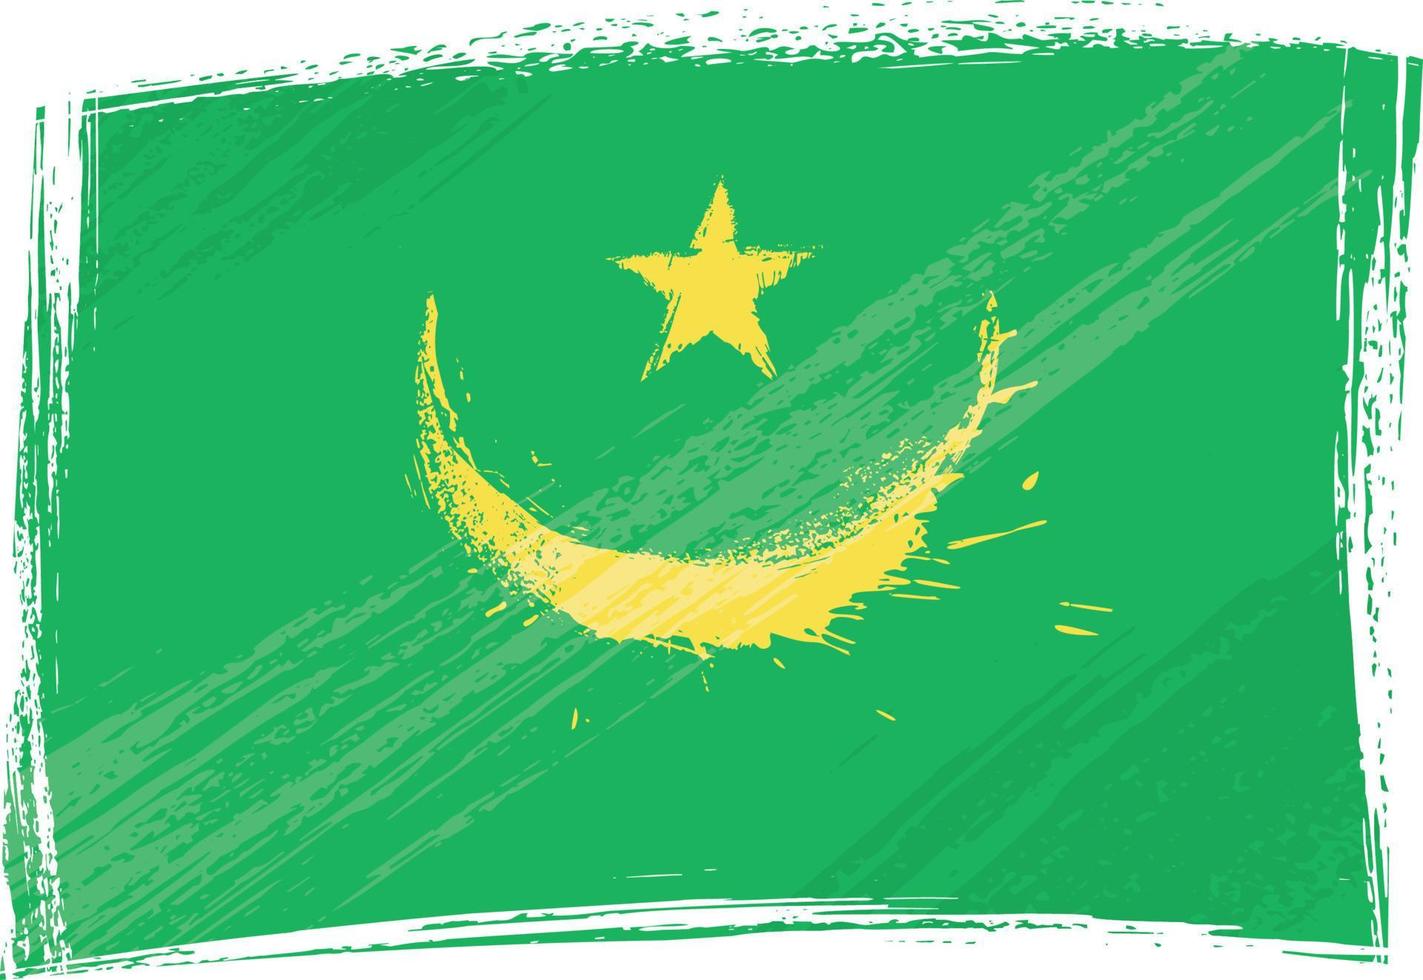 Historical Mauritania national flag created in grunge style vector